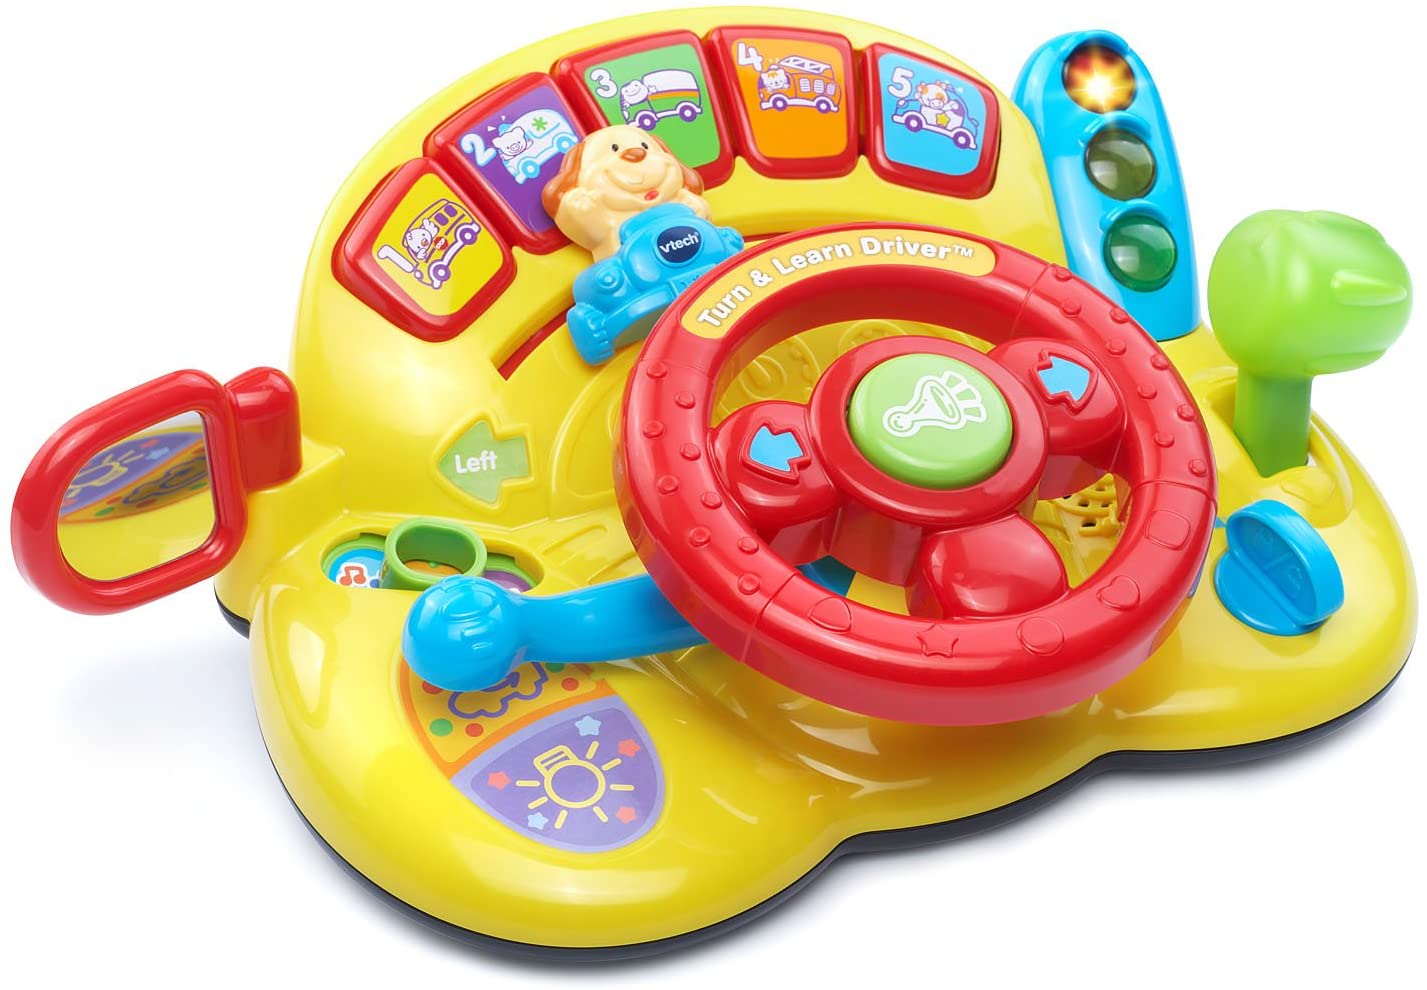 vtech　アクティビティ　運転　ドライビングレッスン　VTech Turn and Learn Driver　キッズ 子供 知育玩具　英会話　英語 【送料無料】【代引不可】【あす楽不可】